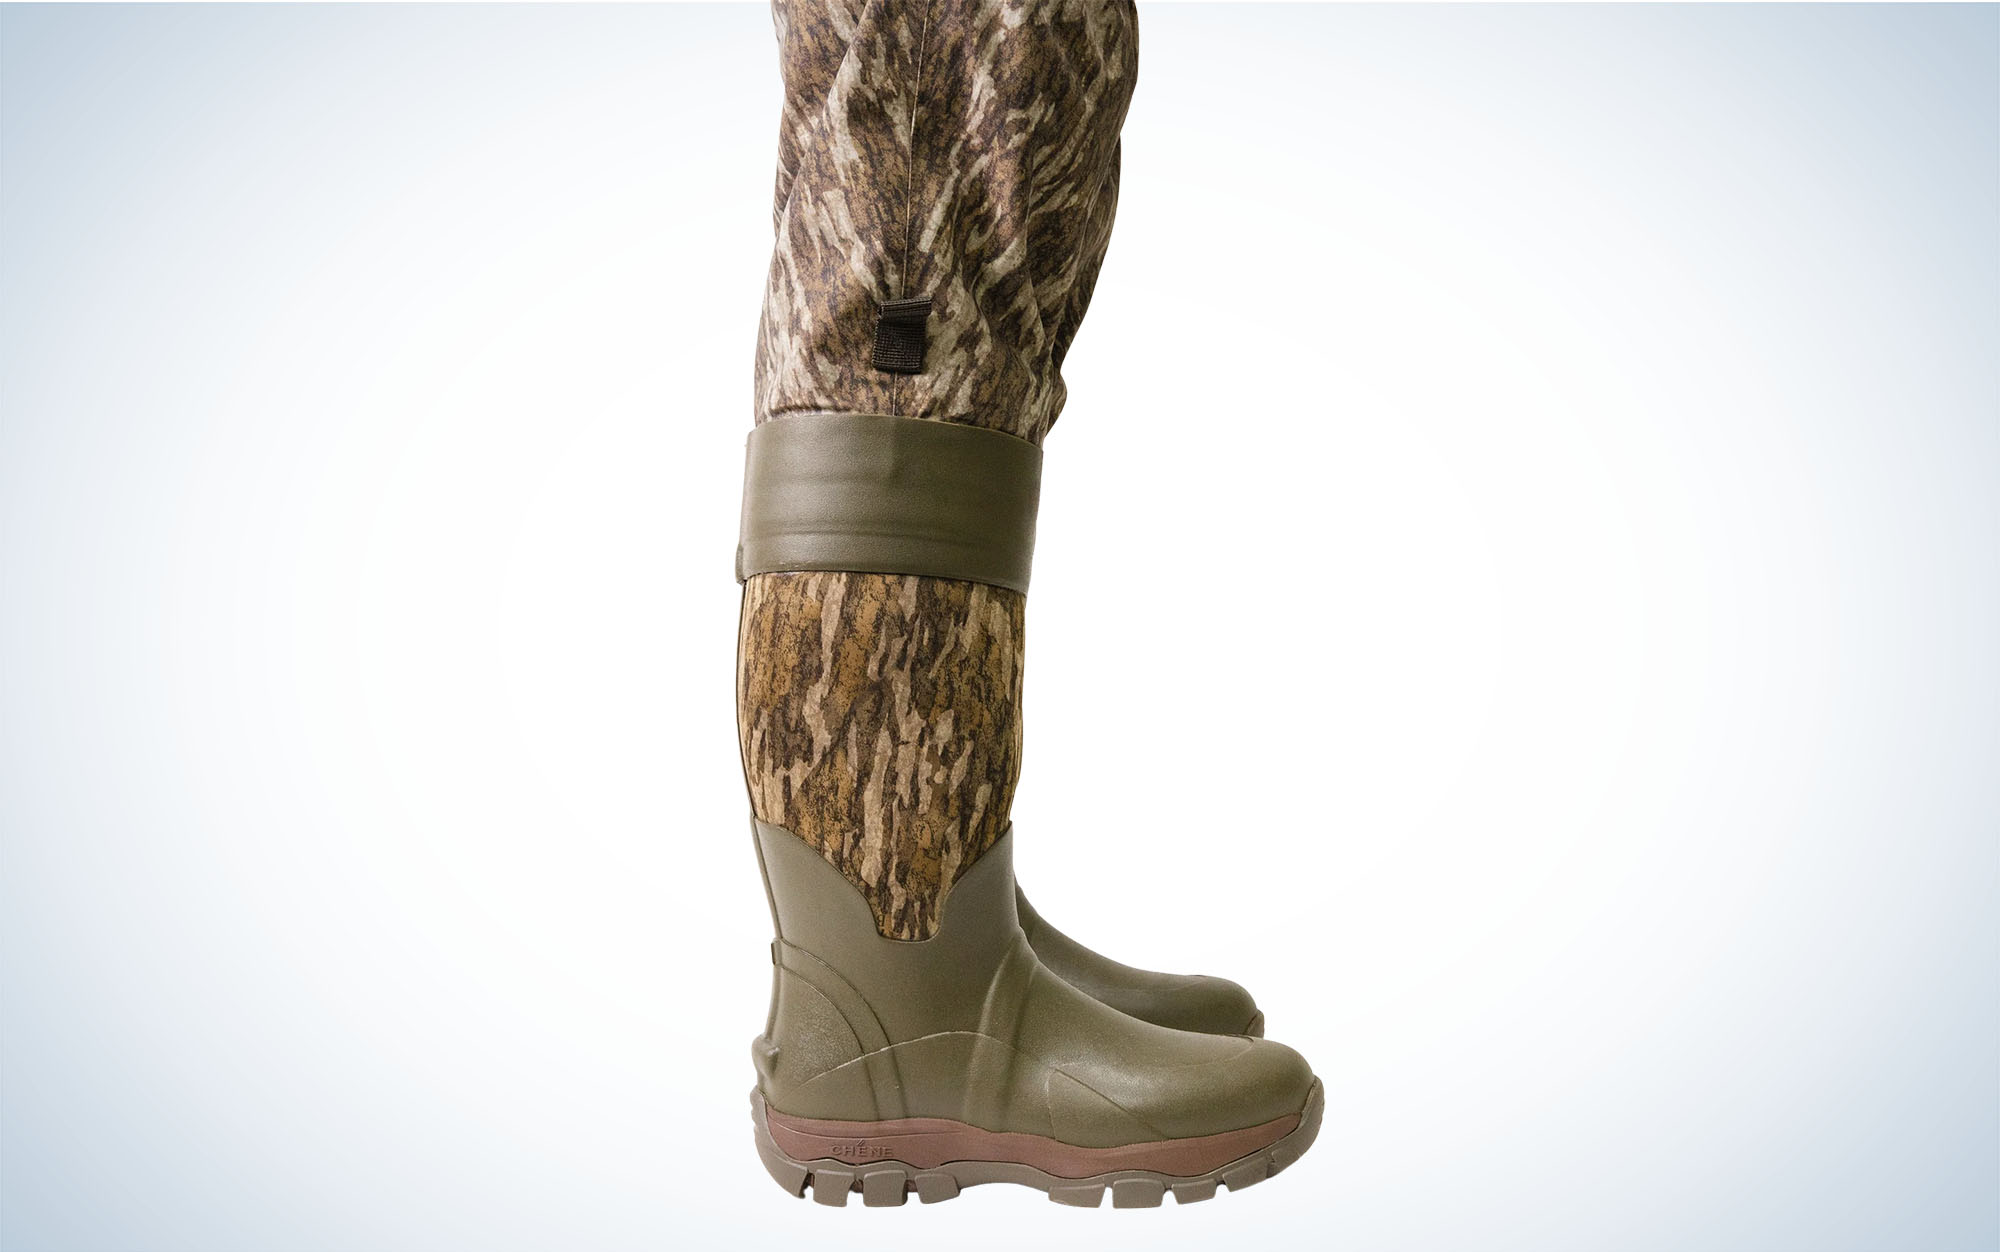 We tested the Chene Slough Boot.